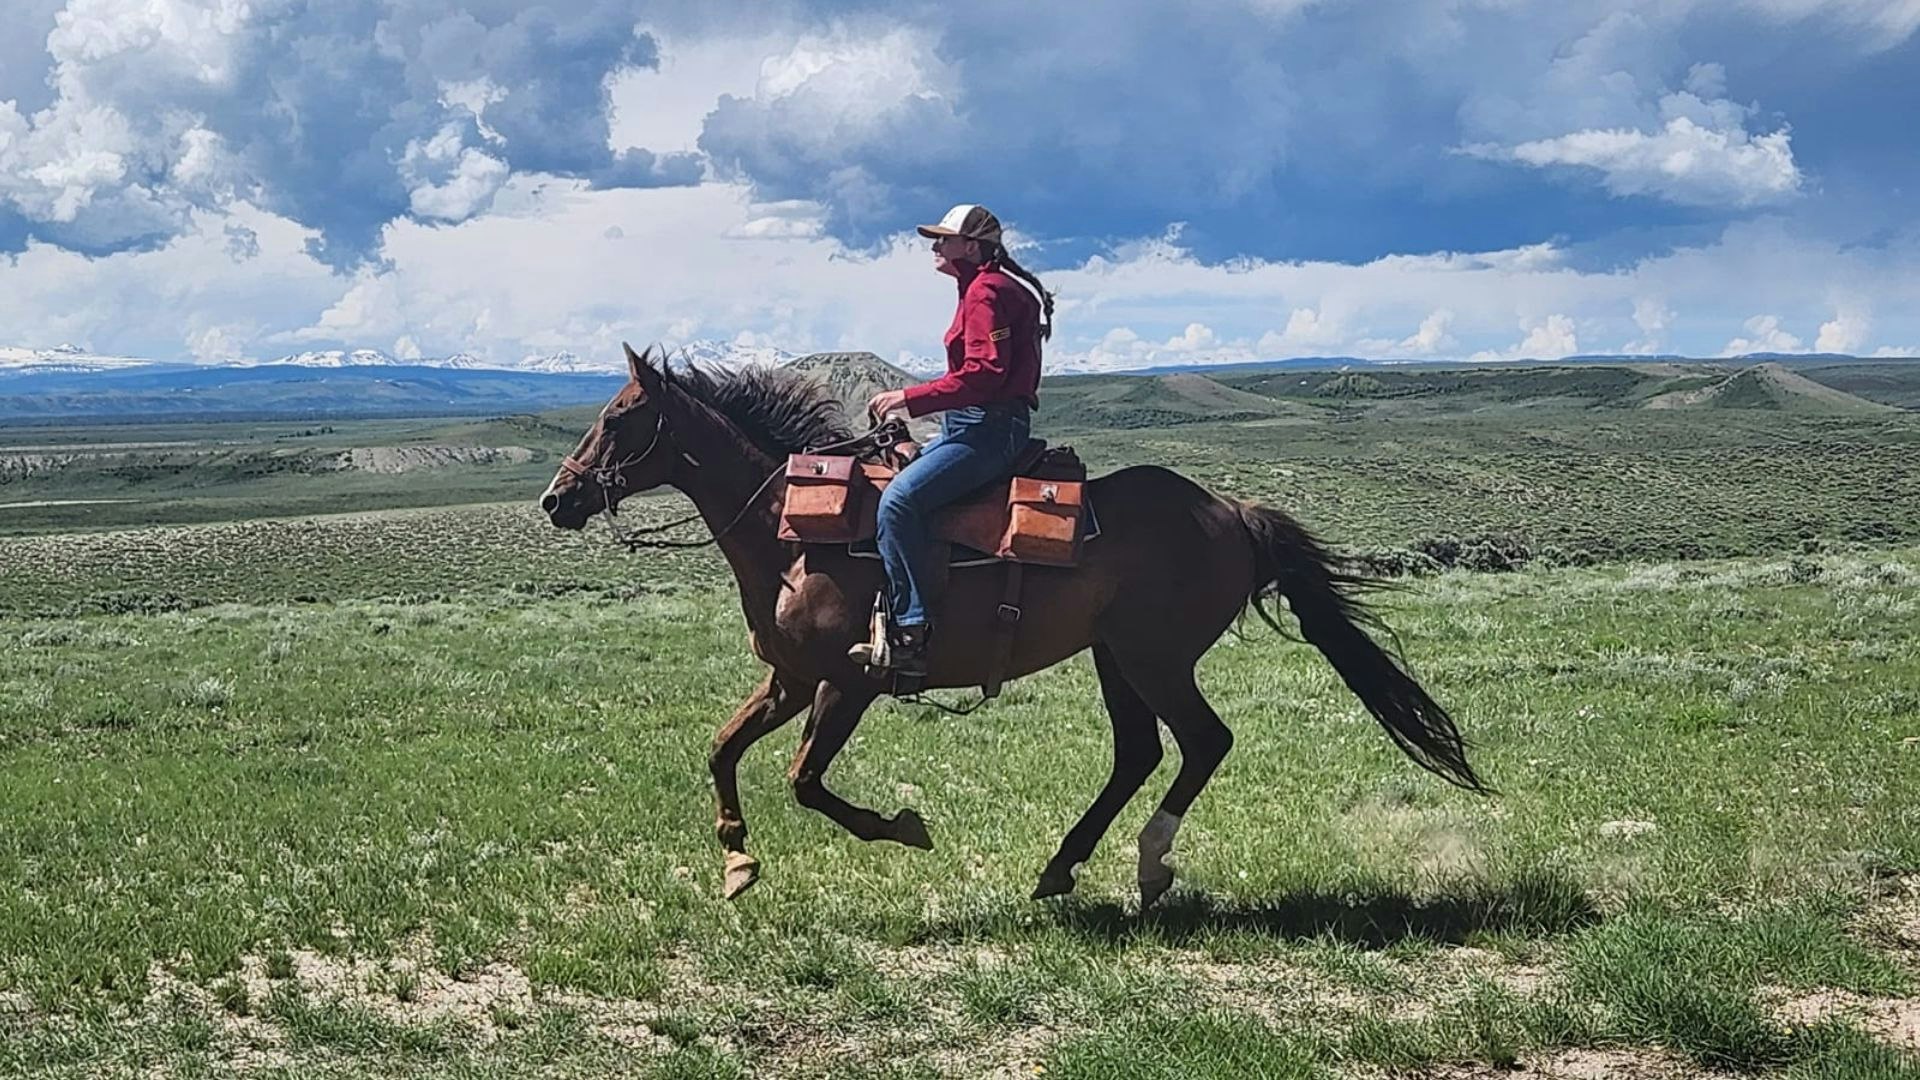 People are sharing photos of the Pony Express Re-Ride on the Wyoming Through the Lens Facebook page.